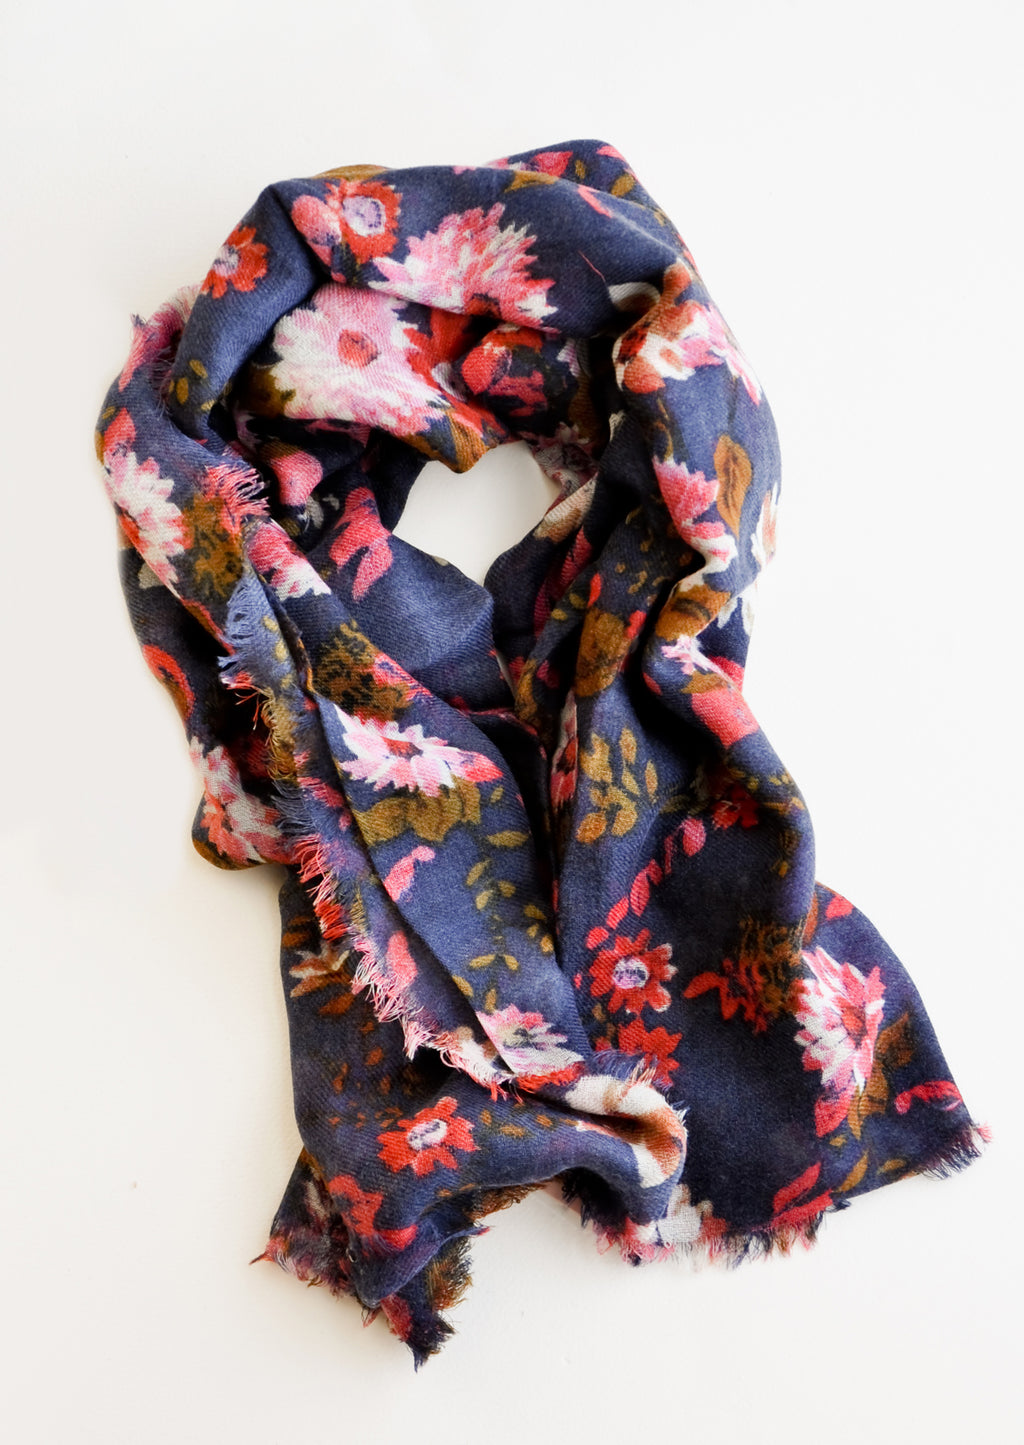 Midnight Blue: Wool-cashmere scarf with dark blue background and multi-colored pink and red floral pattern 